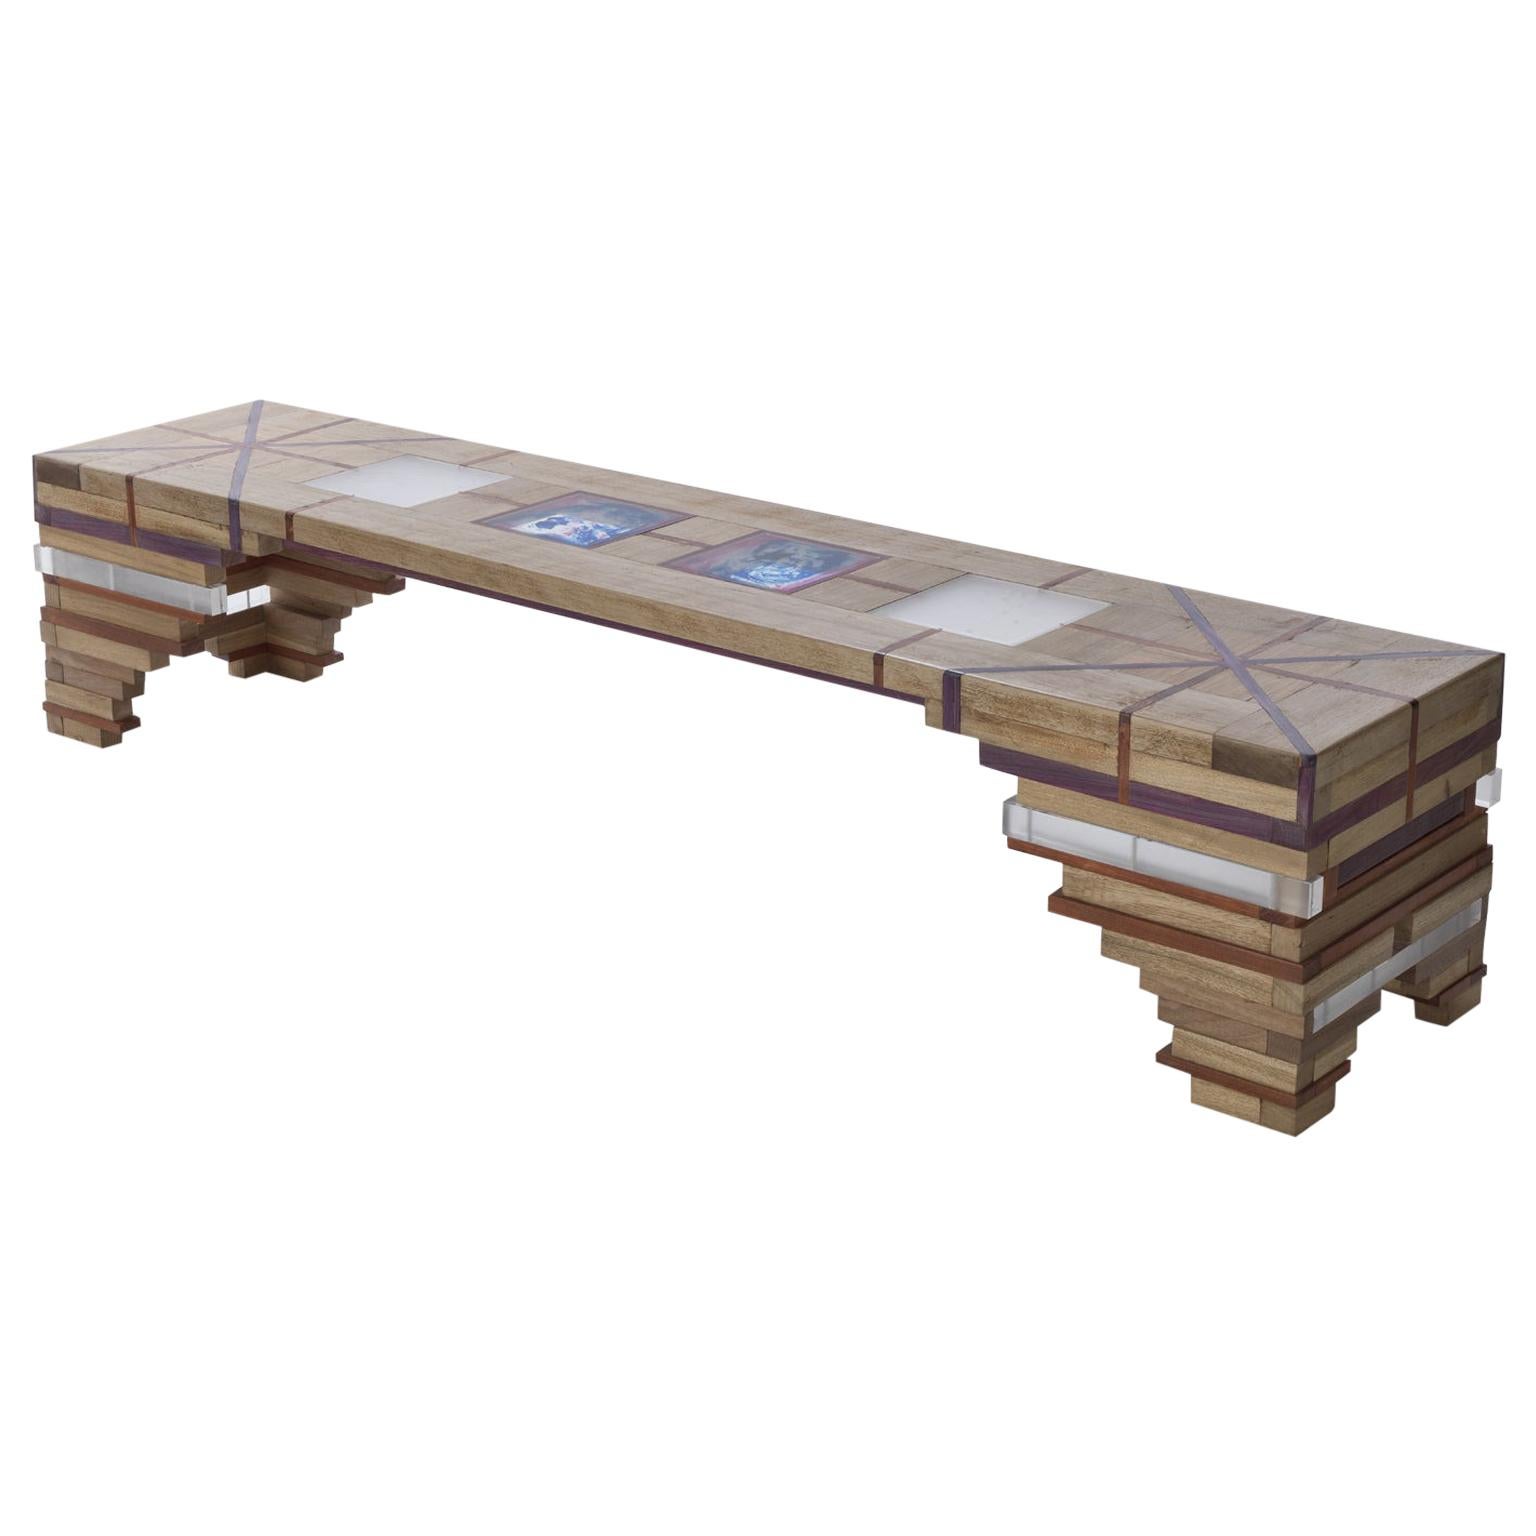 Marajo Reflected Sky Wooden Bench For Sale